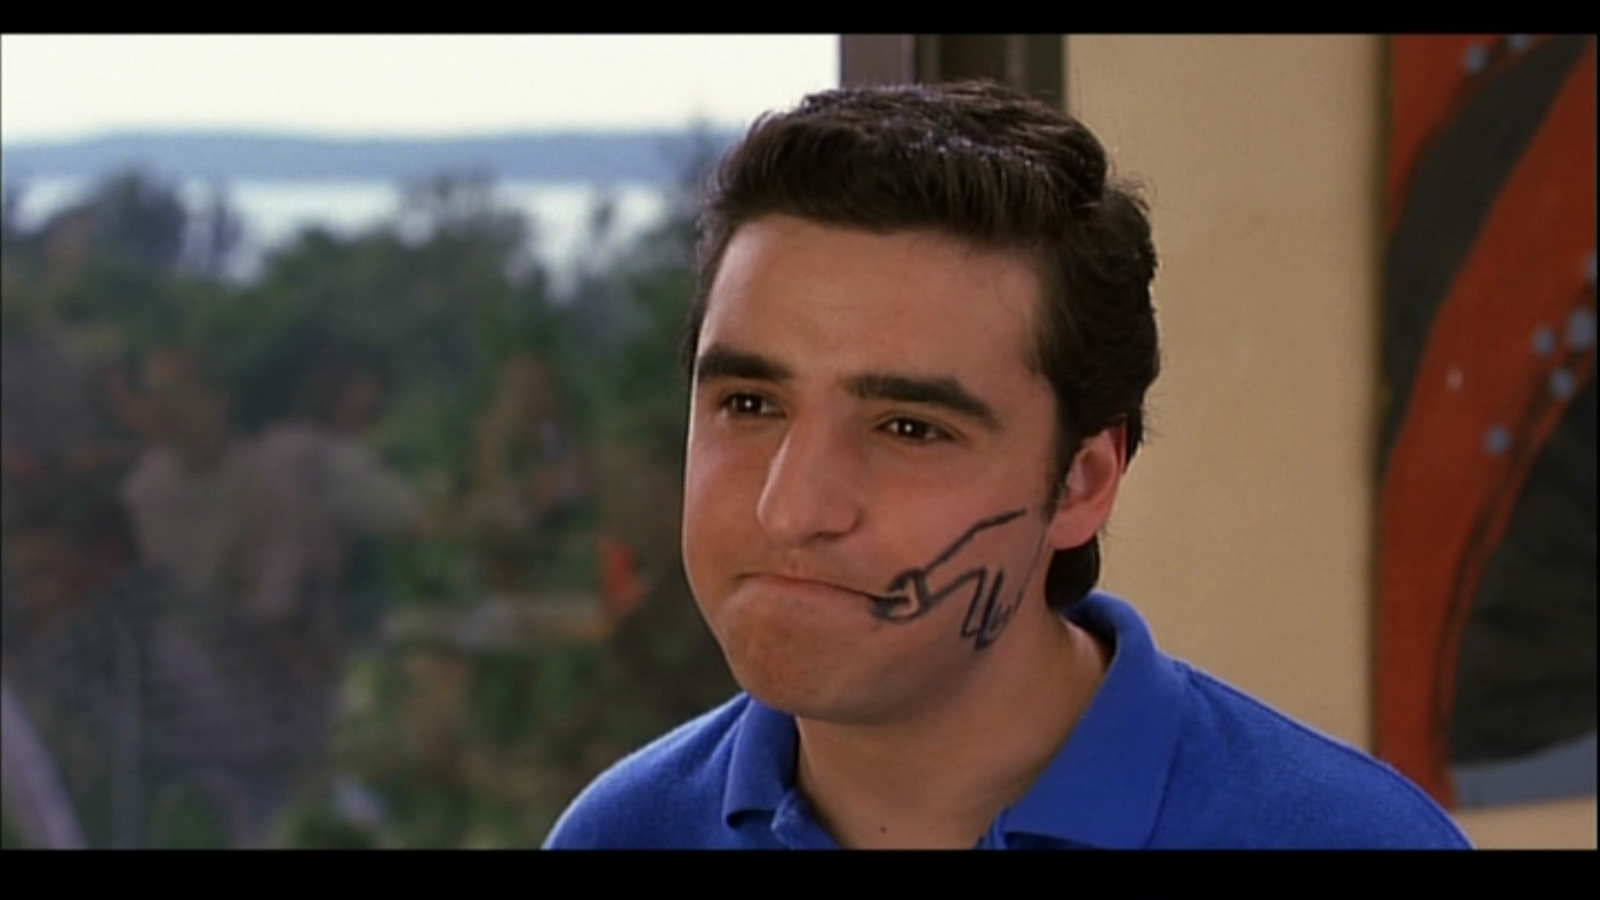 Dick on face gif 10 thing i hate about you